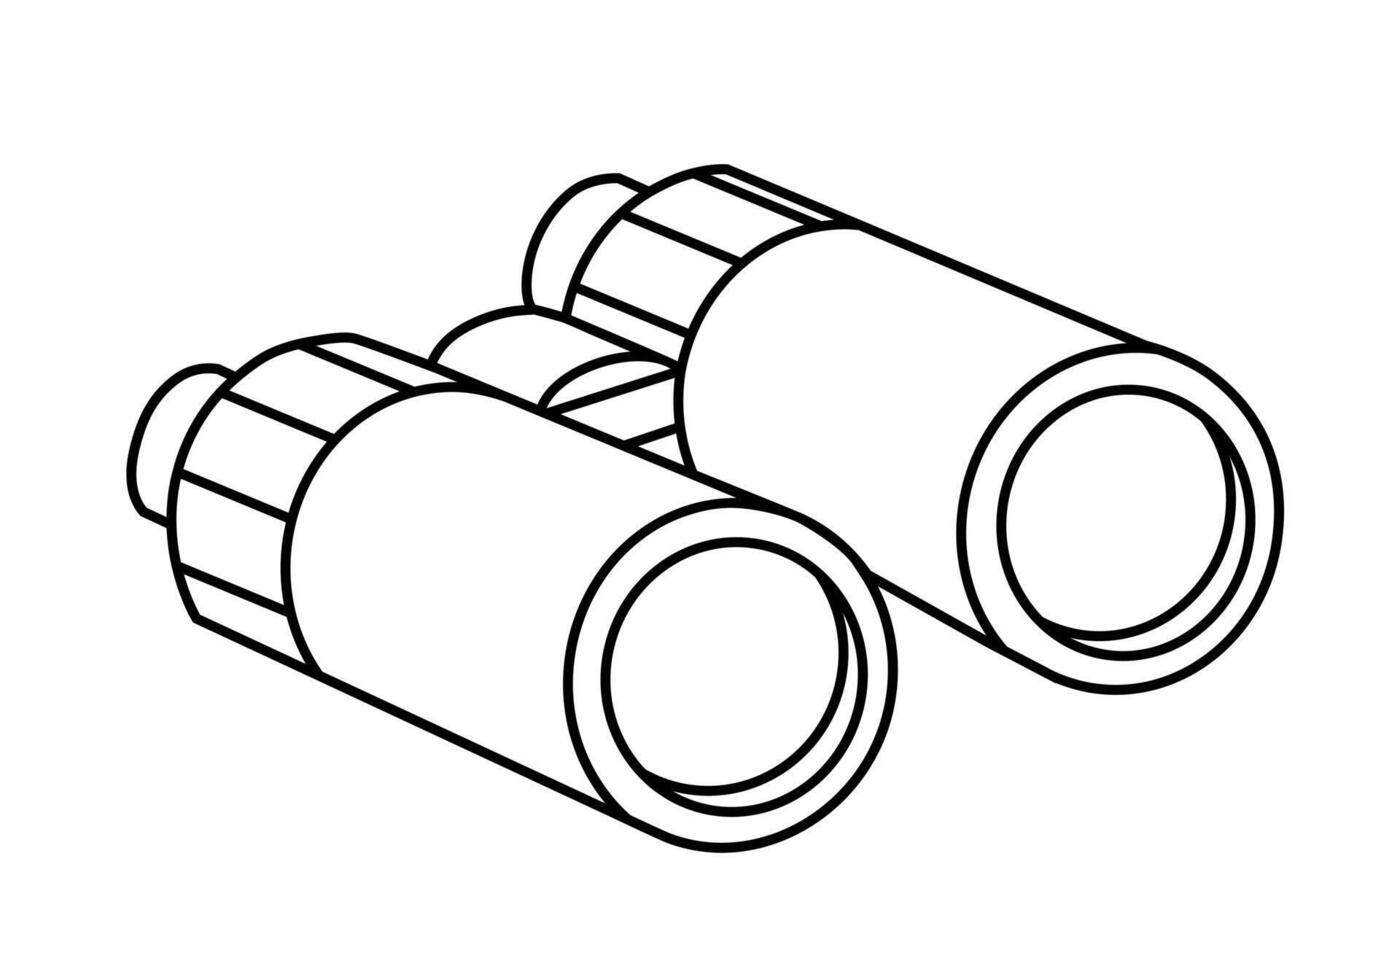 Hand drawn cute outline illustration camping binoculars. Flat searching optical instrument sticker line art doodle style. Tourism discover or explore utensil icon. Adventure, hiking. Isolated. vector